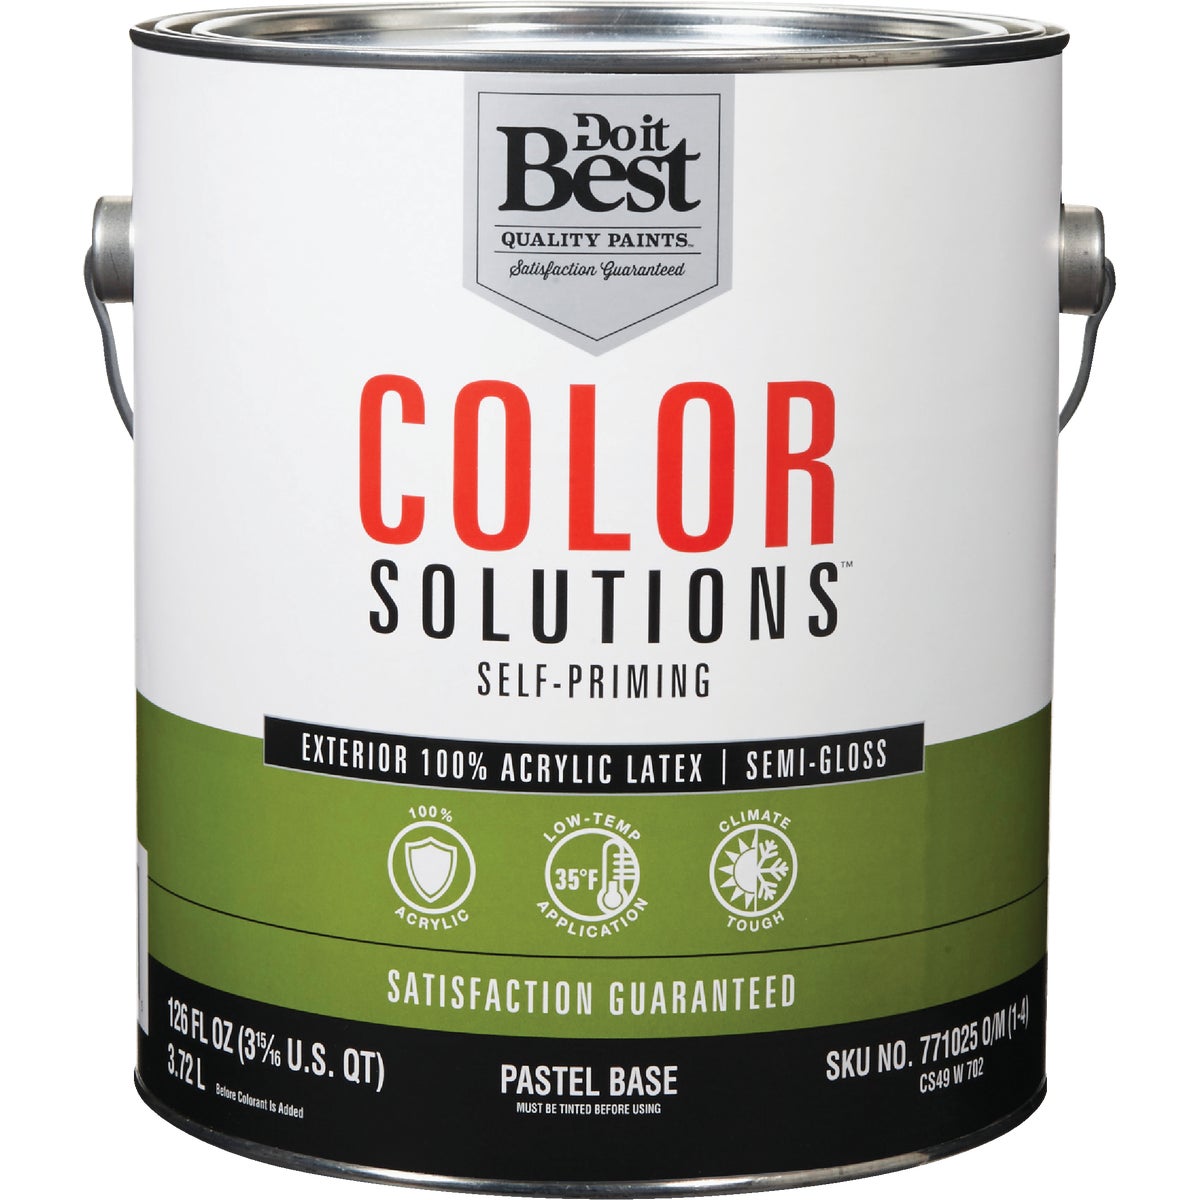 Do it Best Color Solutions 100% Acrylic Latex Self-Priming Semi-Gloss Exterior House Paint, Pastel Base, 1 Gal.